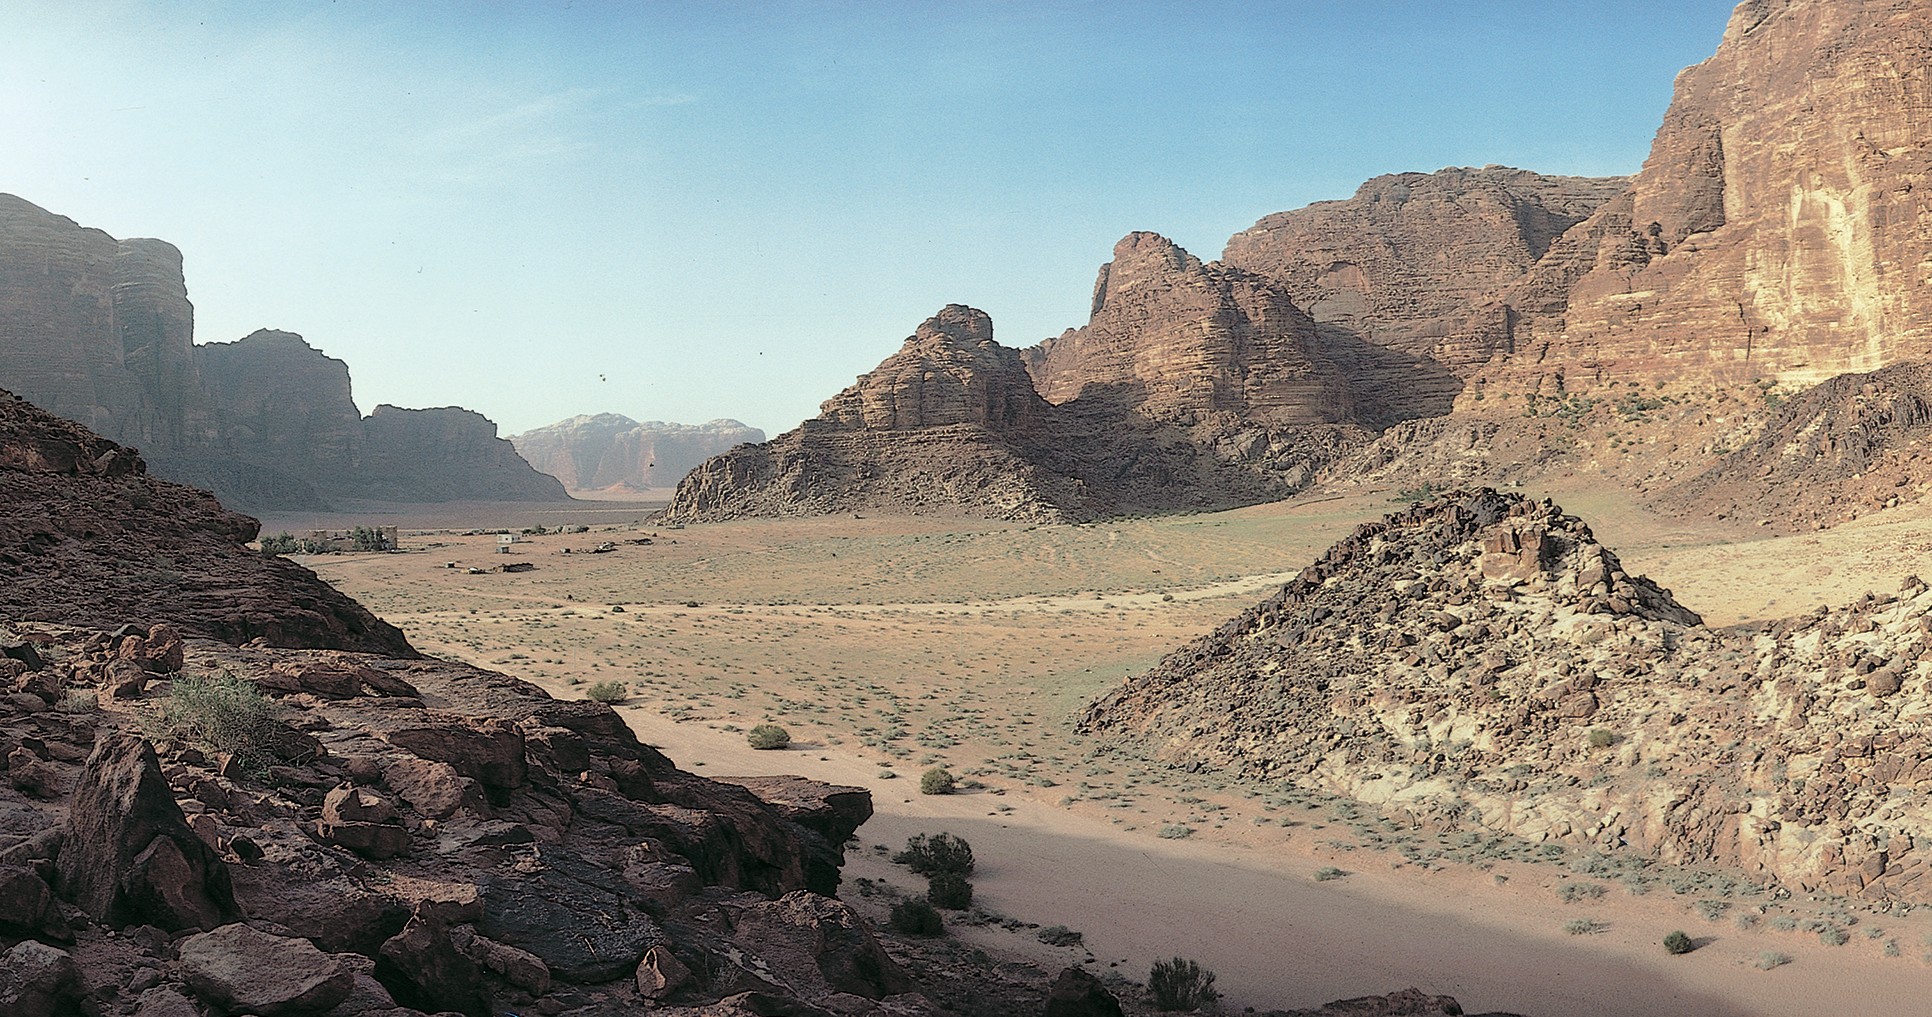 The Wadi Rum looking toward the south. The Wadi is located 30 miles north-east of Aqabah and 190 miles south of Amman, Jordan.